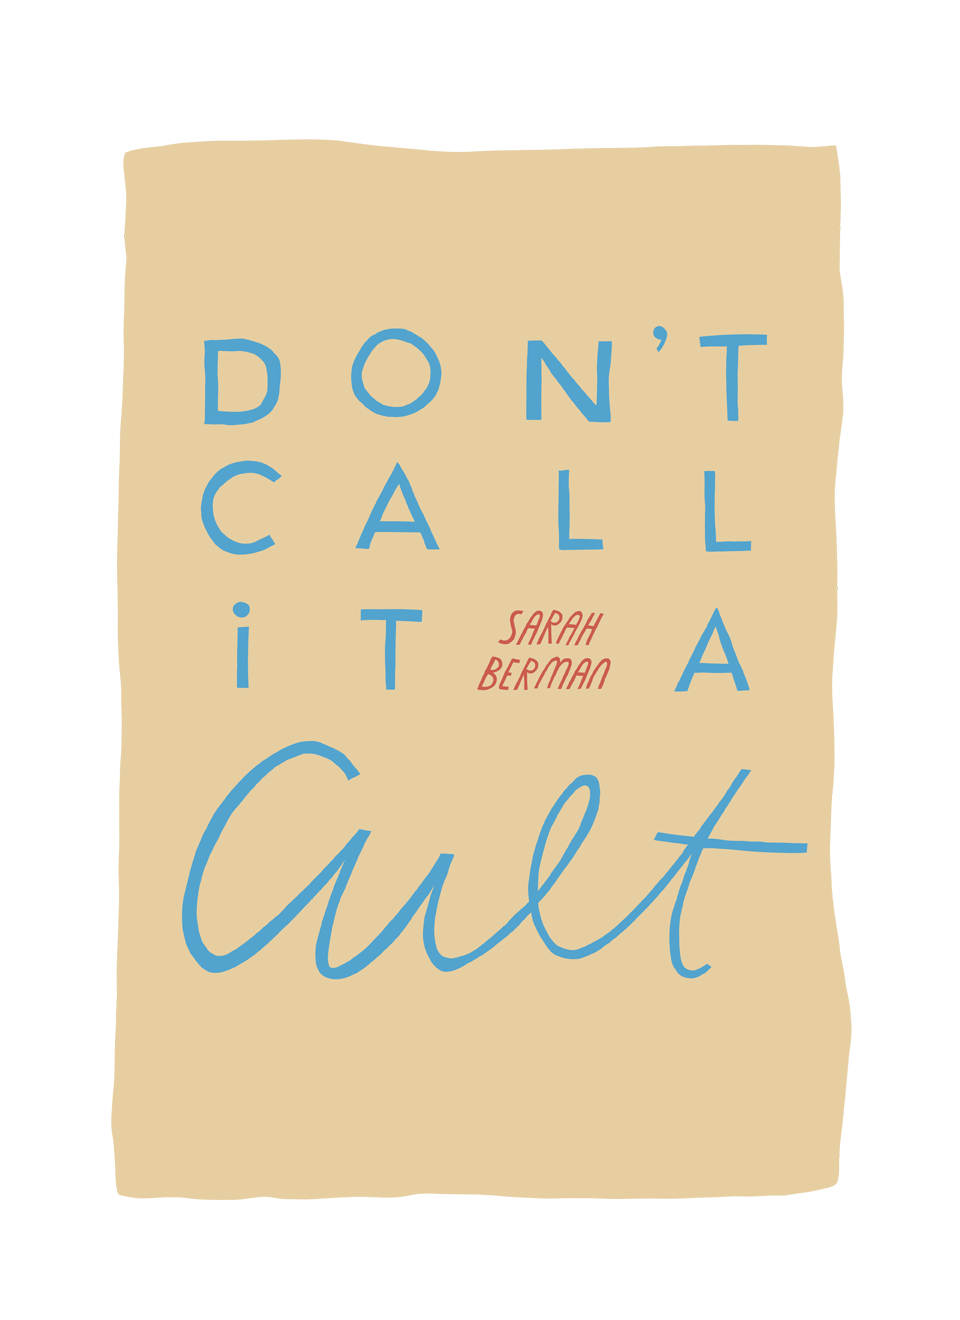 Don't Call It A Cult by Sarah Berman | illustrated by Alicia Carvalho